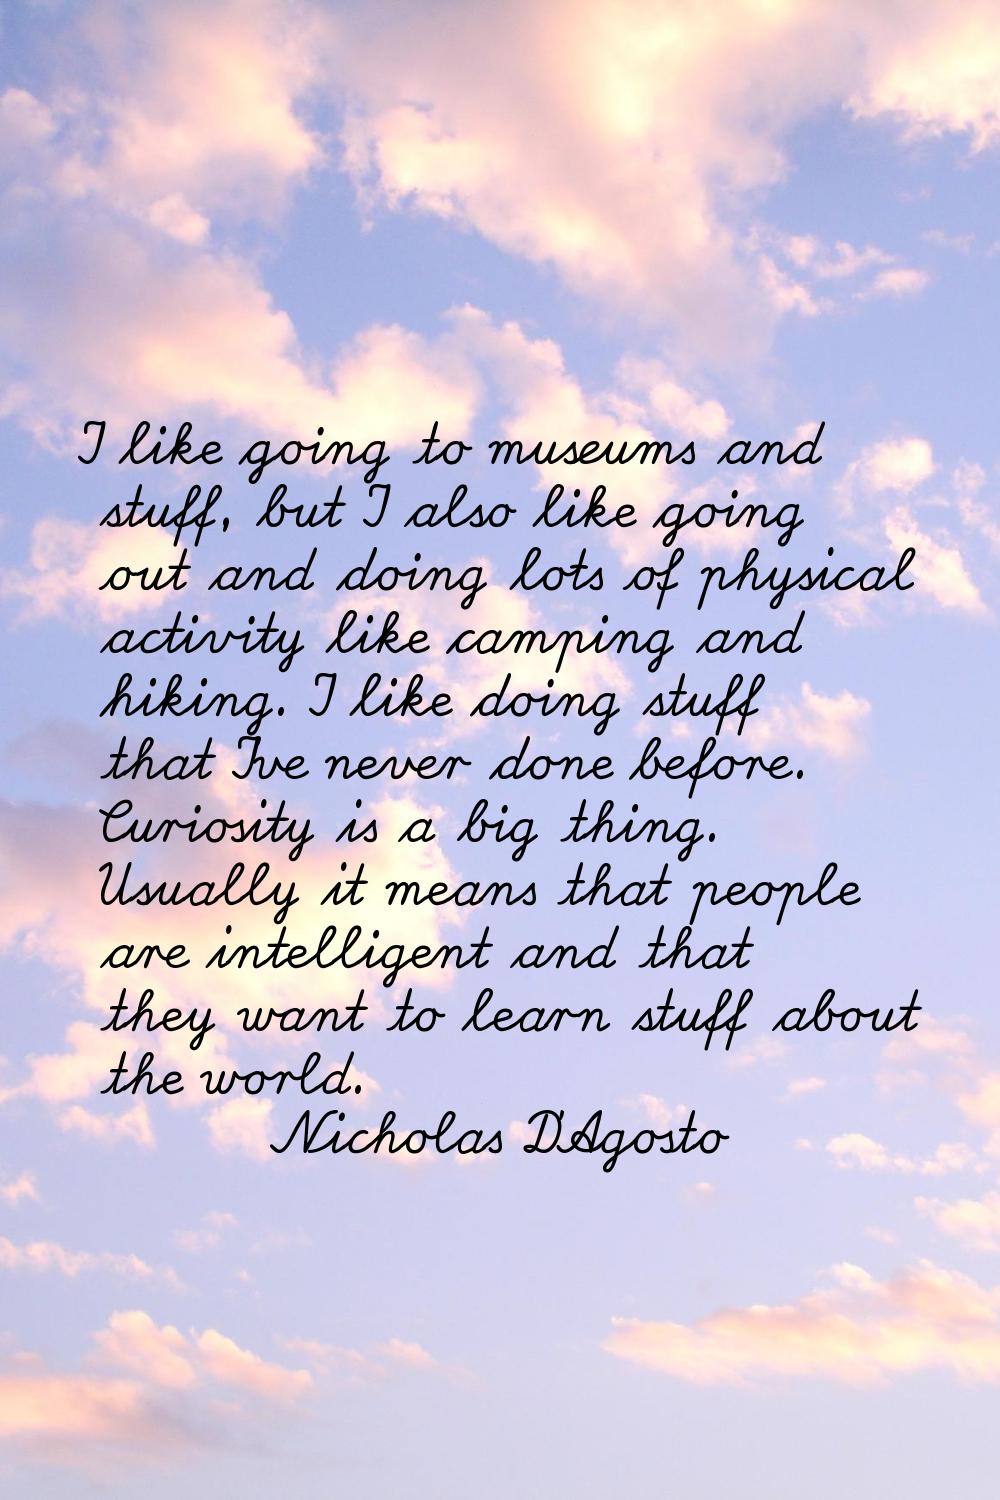 I like going to museums and stuff, but I also like going out and doing lots of physical activity li